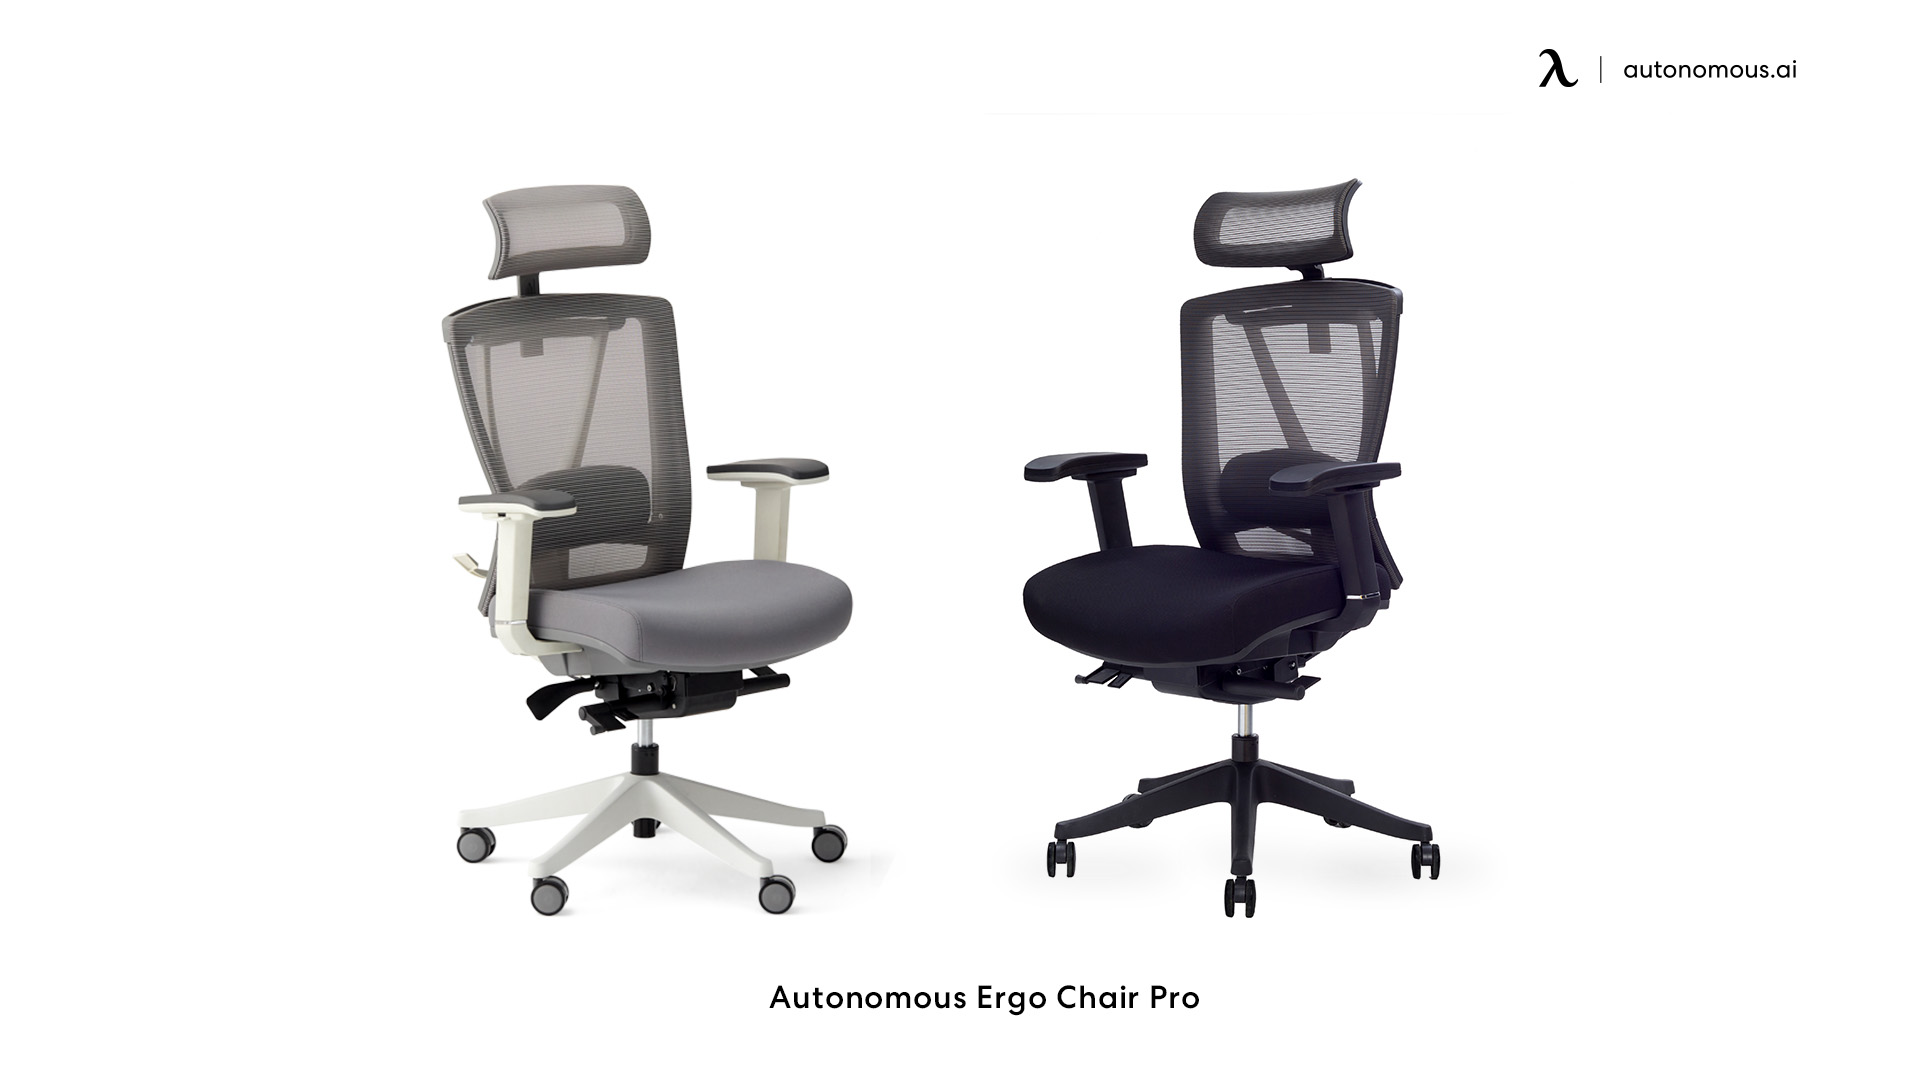 ErgoChair Pro office chair with adjustable arms